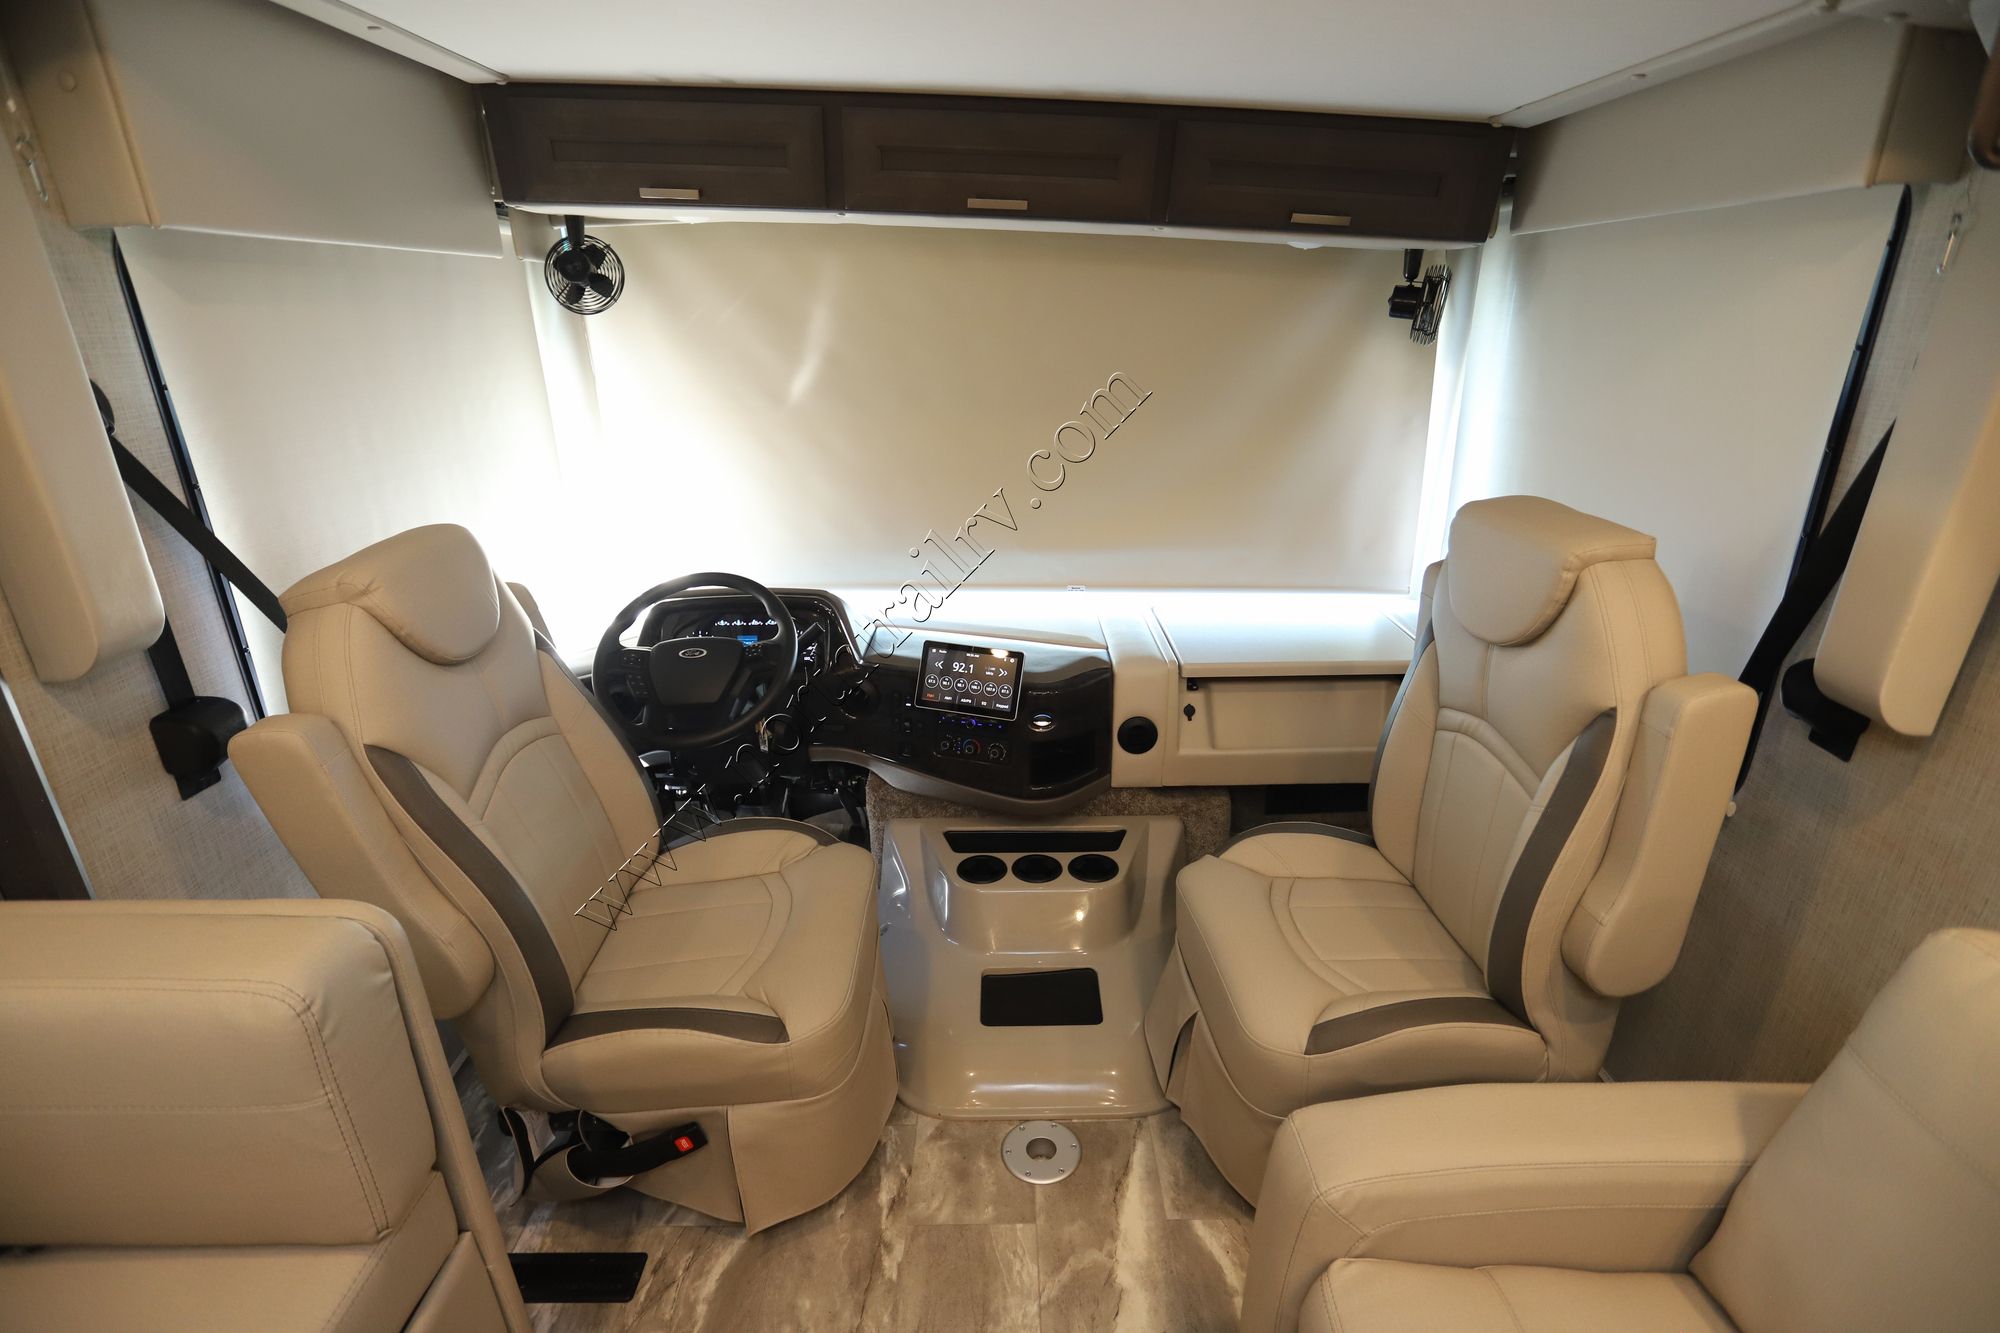 New 2023 Thor Challenger 37DS Class A  For Sale